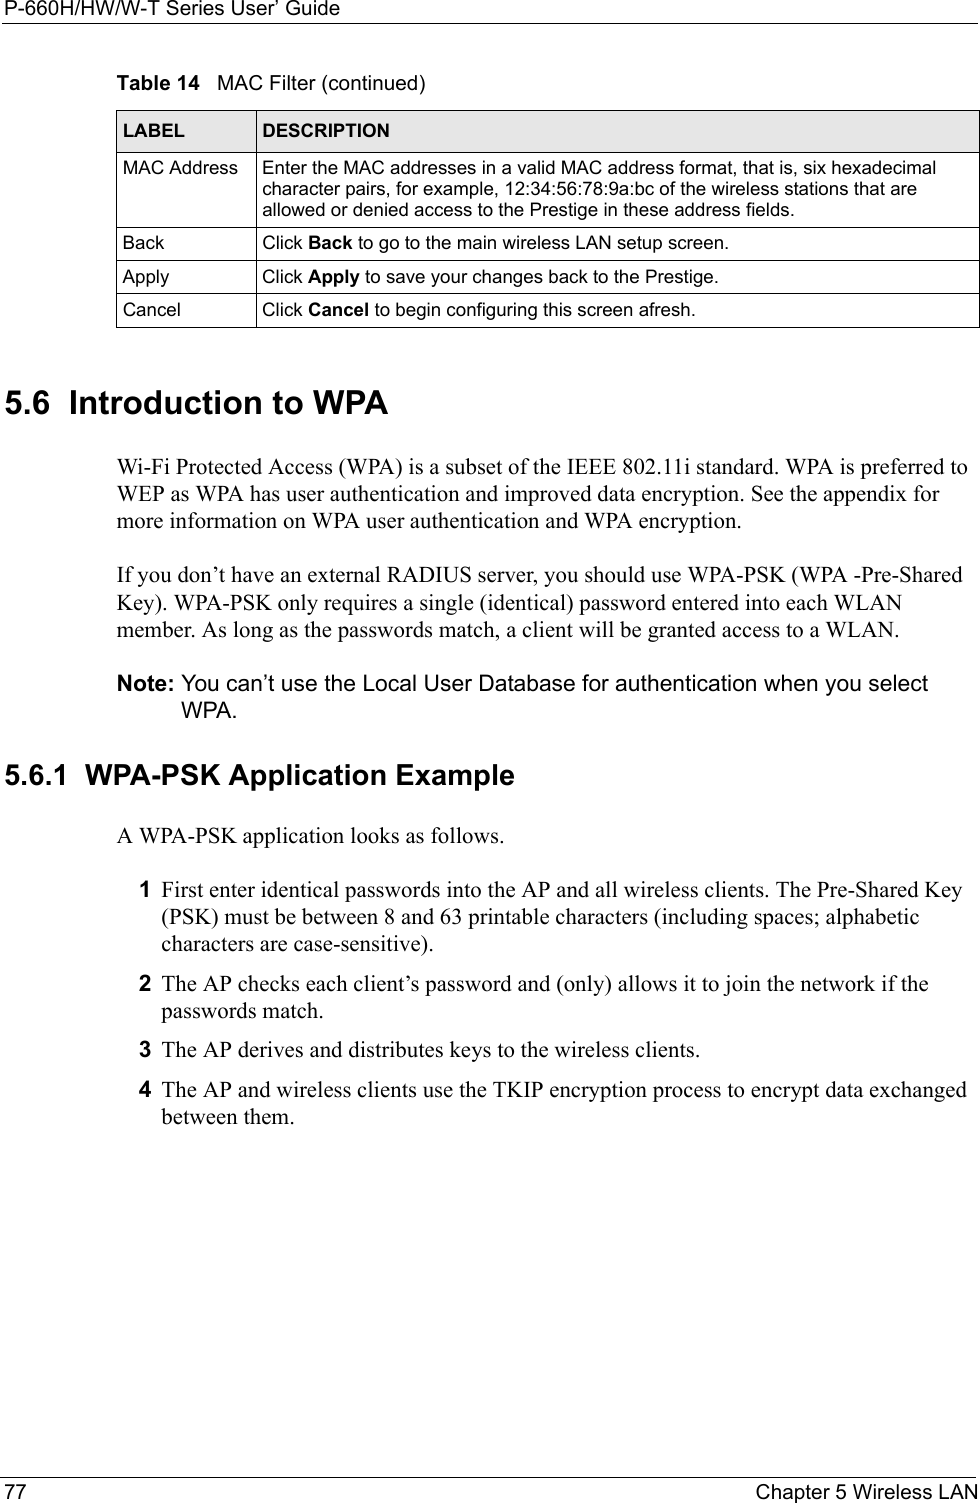 P-660H/HW/W-T Series User’ Guide77 Chapter 5 Wireless LAN5.6  Introduction to WPA  Wi-Fi Protected Access (WPA) is a subset of the IEEE 802.11i standard. WPA is preferred to WEP as WPA has user authentication and improved data encryption. See the appendix for more information on WPA user authentication and WPA encryption.If you don’t have an external RADIUS server, you should use WPA-PSK (WPA -Pre-Shared Key). WPA-PSK only requires a single (identical) password entered into each WLAN member. As long as the passwords match, a client will be granted access to a WLAN. Note: You can’t use the Local User Database for authentication when you select WPA.5.6.1  WPA-PSK Application ExampleA WPA-PSK application looks as follows.1First enter identical passwords into the AP and all wireless clients. The Pre-Shared Key (PSK) must be between 8 and 63 printable characters (including spaces; alphabetic characters are case-sensitive).2The AP checks each client’s password and (only) allows it to join the network if the passwords match.3The AP derives and distributes keys to the wireless clients.4The AP and wireless clients use the TKIP encryption process to encrypt data exchanged between them.MAC Address  Enter the MAC addresses in a valid MAC address format, that is, six hexadecimal character pairs, for example, 12:34:56:78:9a:bc of the wireless stations that are allowed or denied access to the Prestige in these address fields.Back Click Back to go to the main wireless LAN setup screen.Apply Click Apply to save your changes back to the Prestige. Cancel Click Cancel to begin configuring this screen afresh.Table 14   MAC Filter (continued)LABEL DESCRIPTION